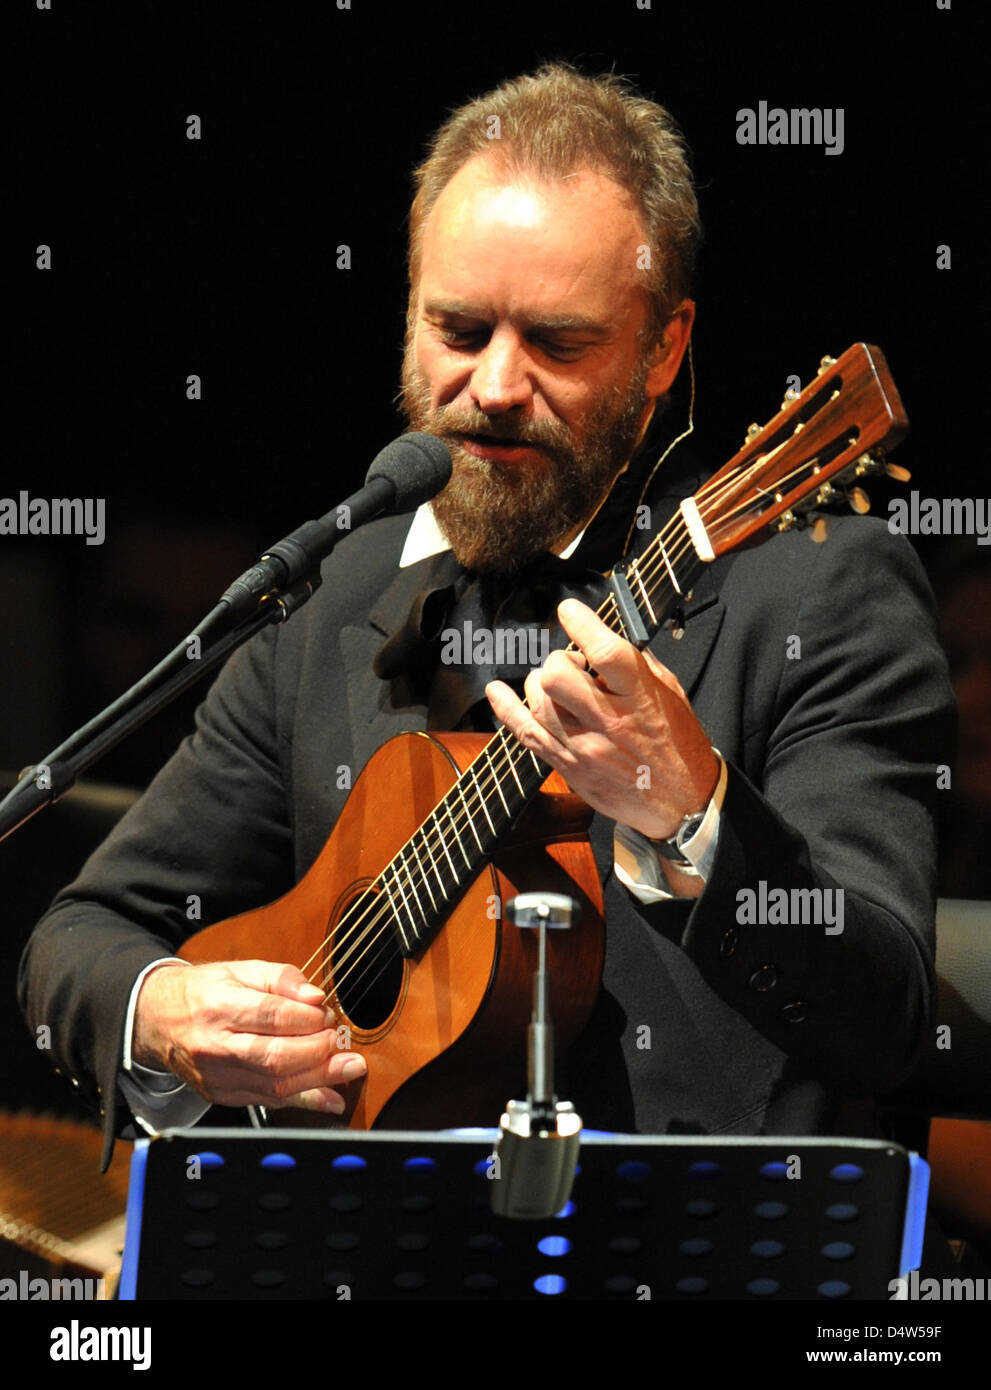 British singer Sting plays the lute during his concert at the 'Festival Theatre' ('Festspielhaus') in Baden Baden, Germany, 17 December 2009. Sting, former singer of the band 'The Police', presented his new album 'If On A Winter's Night' during his only concert in Germany. Photo: Rolf Haid (ATTENTION: EDITORIAL USE ONLY!) Stock Photo